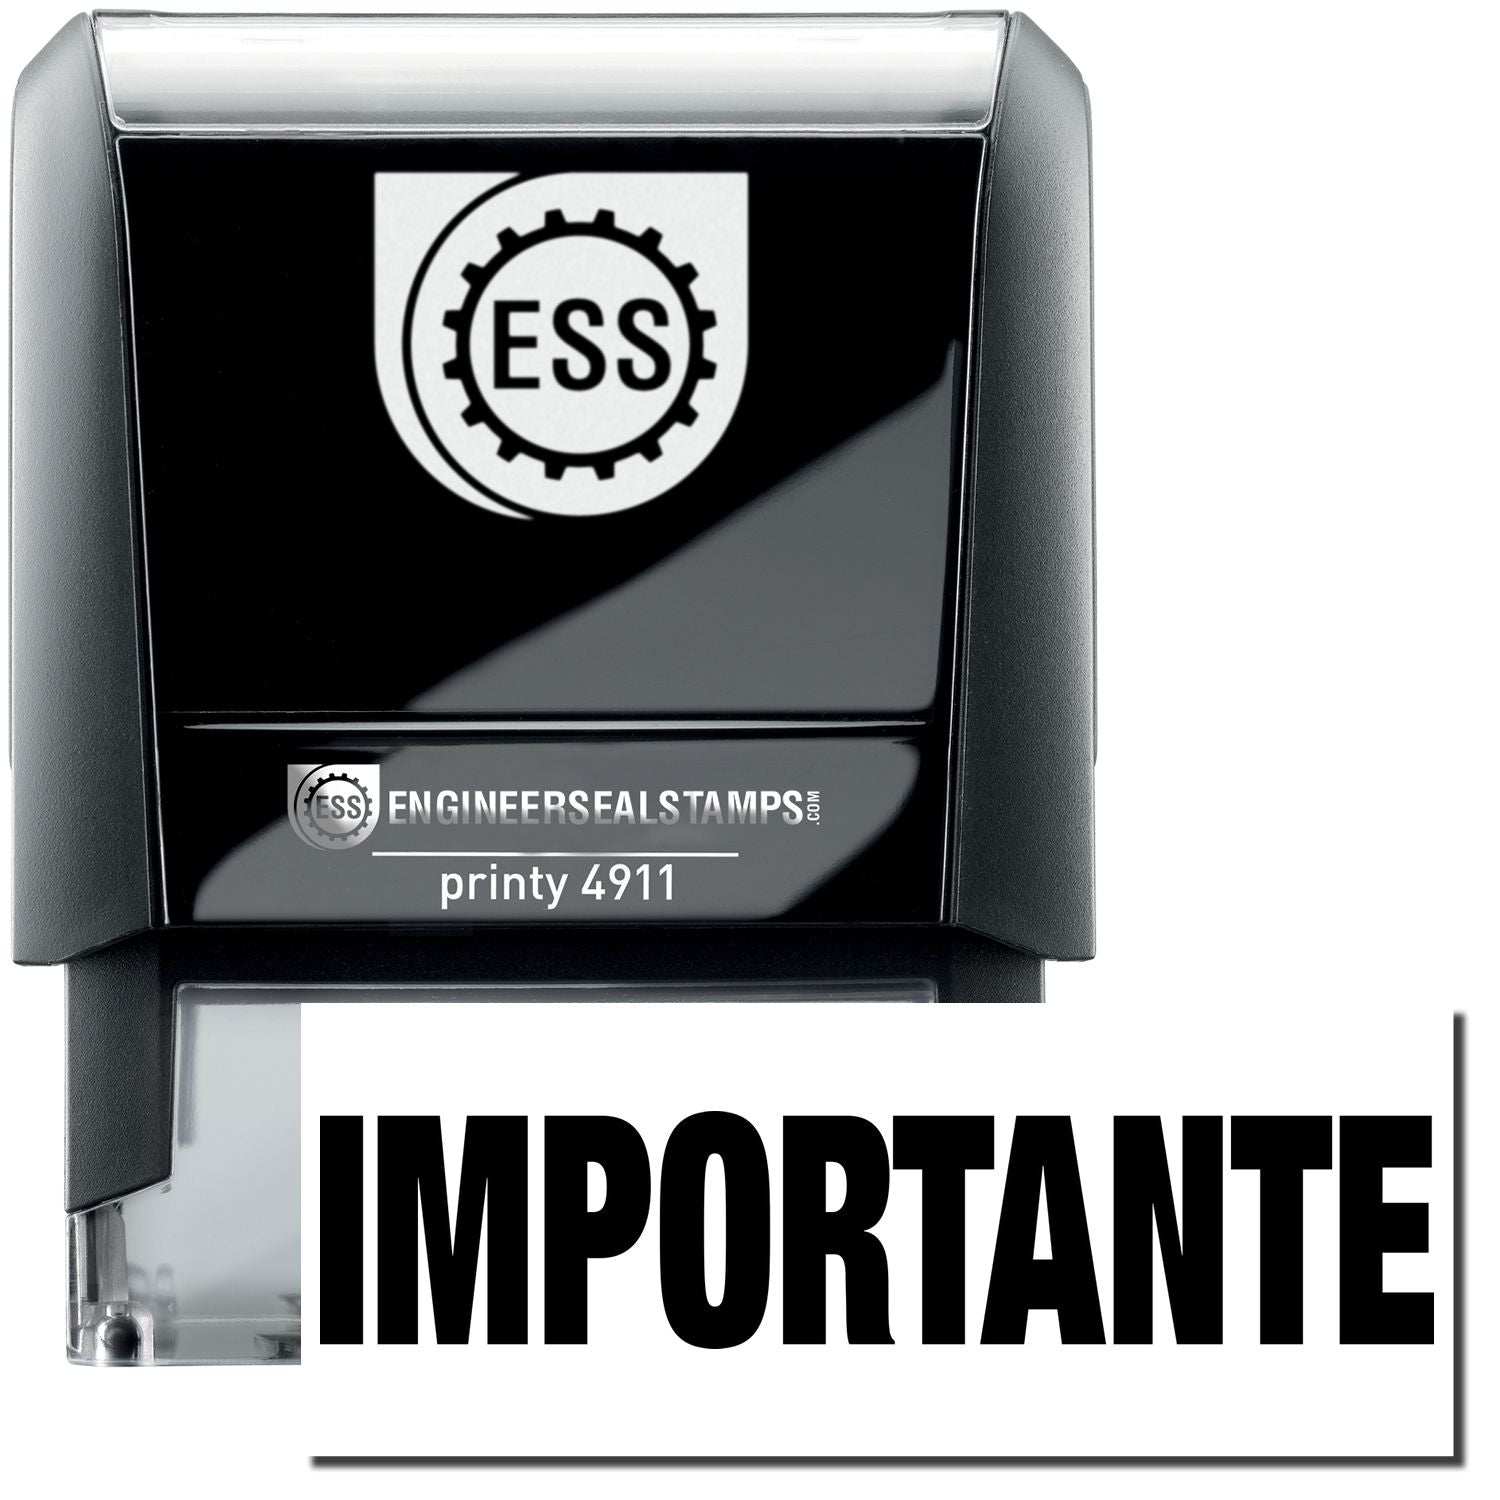 A self-inking stamp with a stamped image showing how the text "IMPORTANTE" is displayed after stamping.